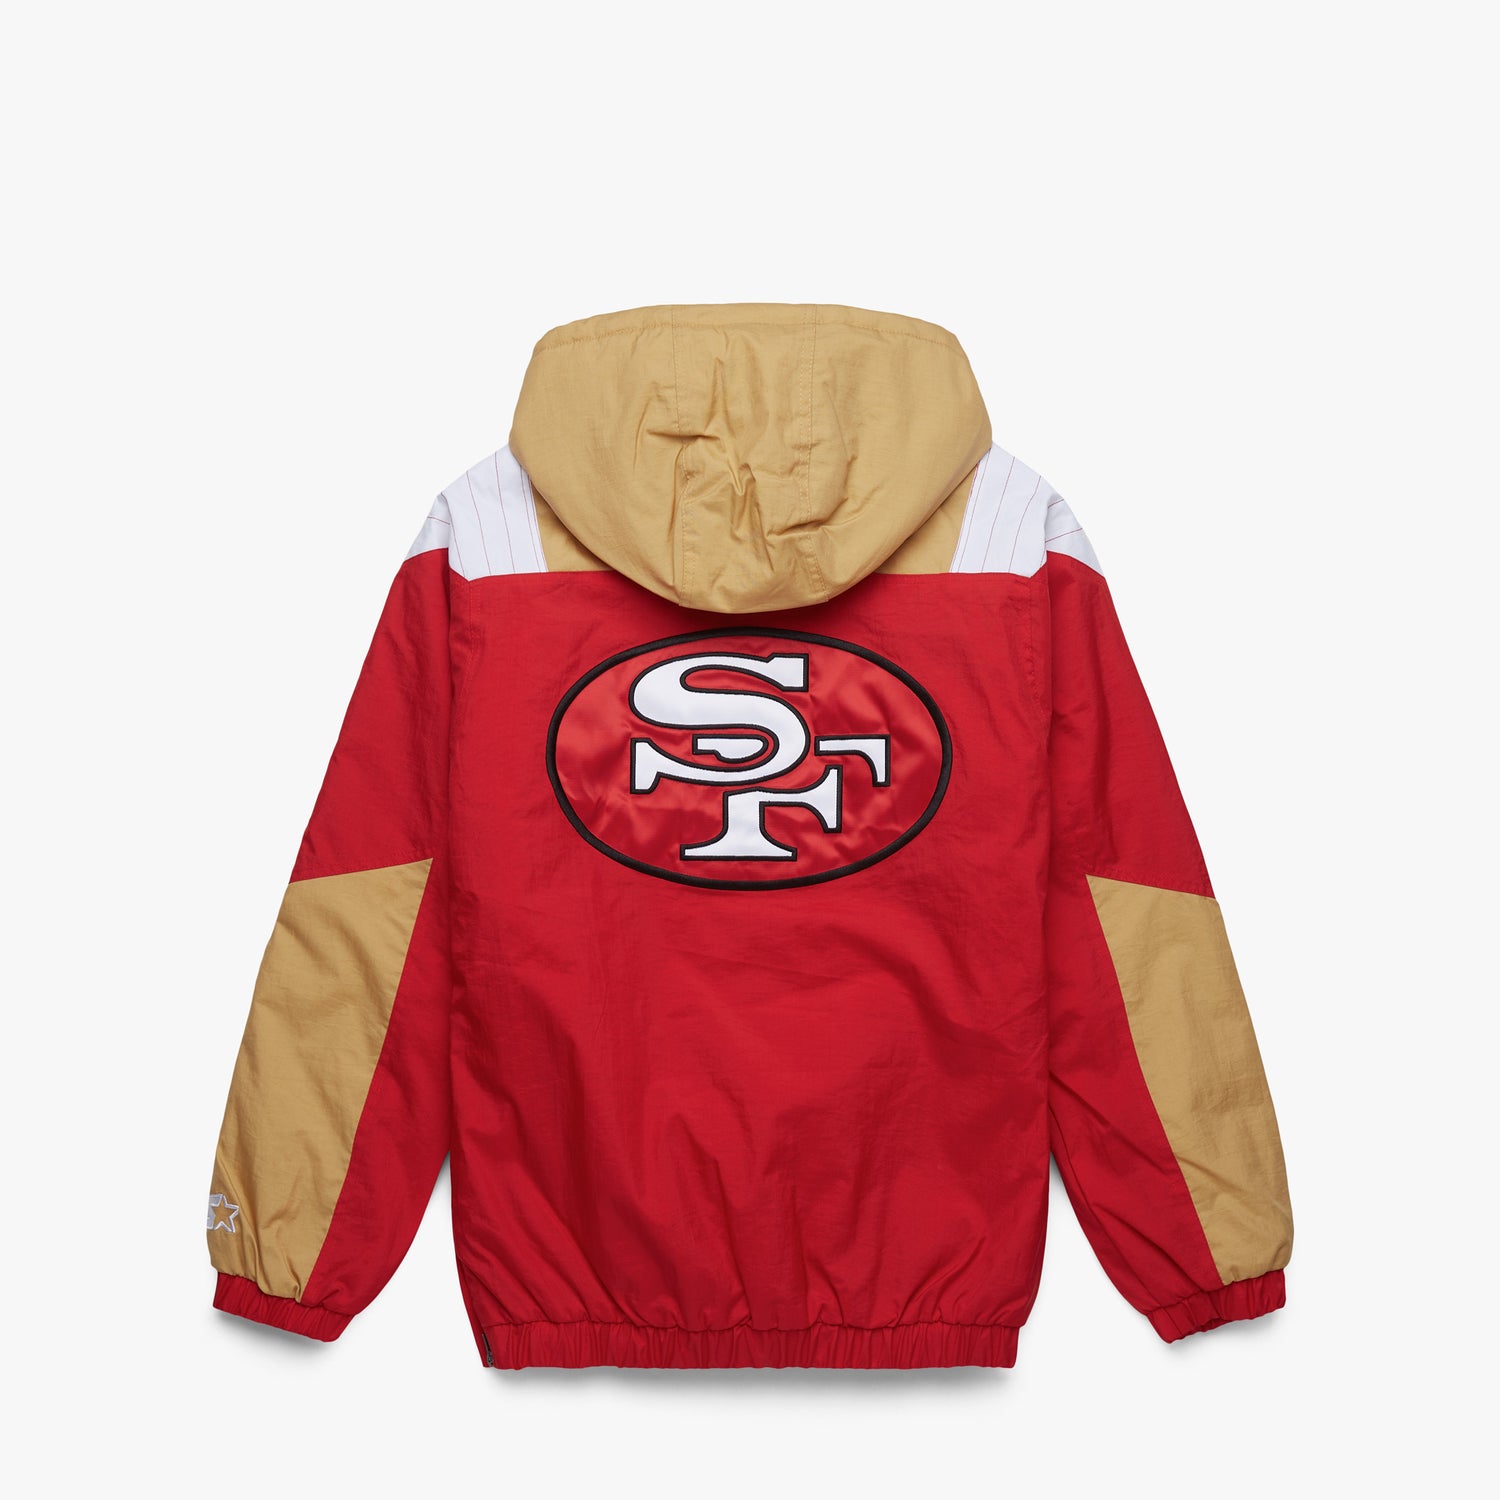 homage 49ers